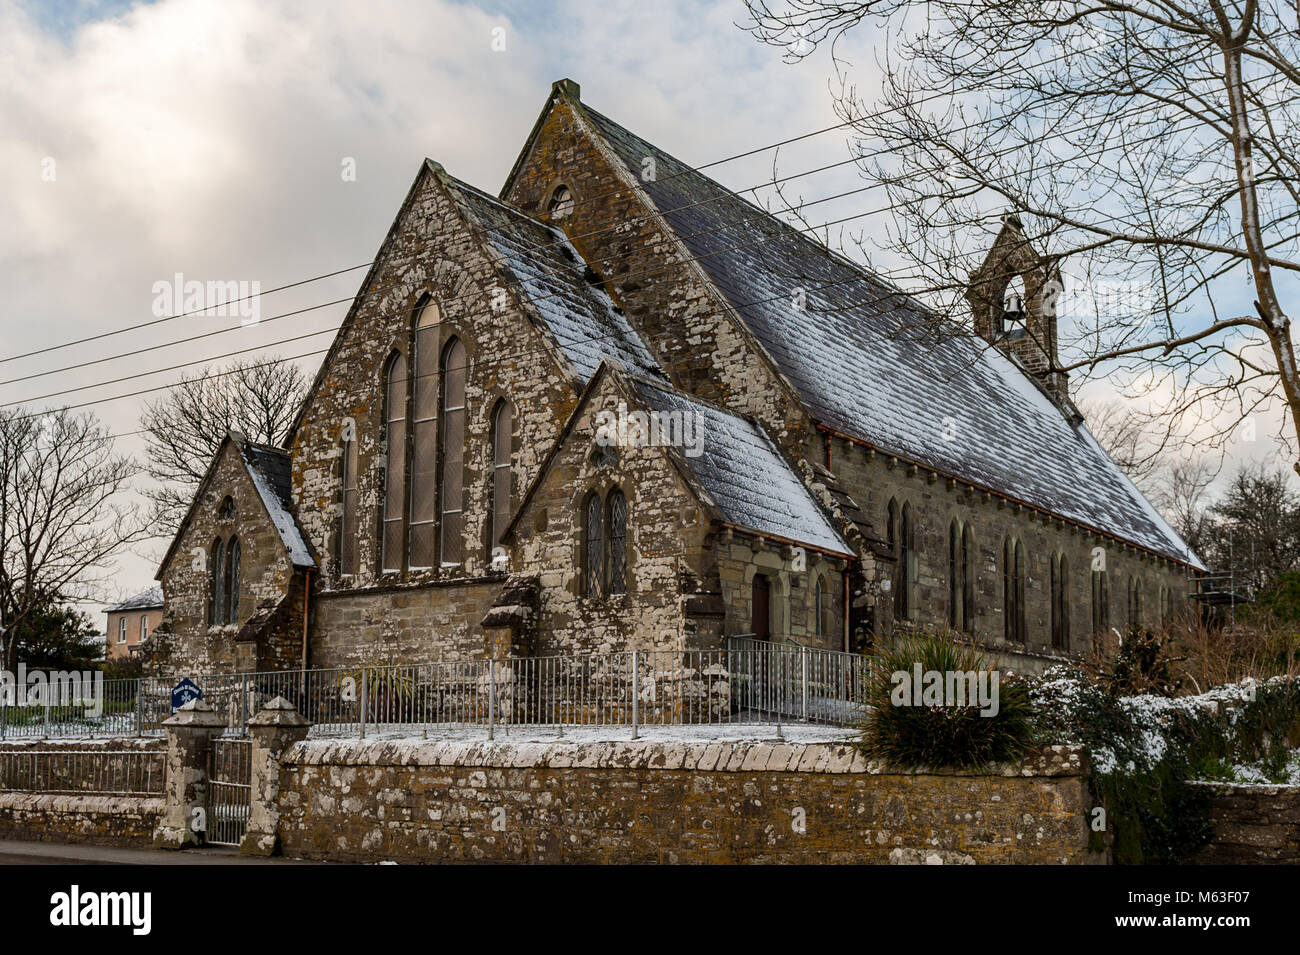 Schull, Ireland. 28th Feb, 2018.  Heavy snow hit West Cork overnight causing widespread travel disruption. Bus Eireann cancelled all school bus services due to the Met Eireann Red Weather Warning.  More snow and freezing temperatures are expected up until the weekend. Holy Trinity Church in Schull received a dusting of snow. Credit: Andy Gibson/Alamy Live News. Stock Photo